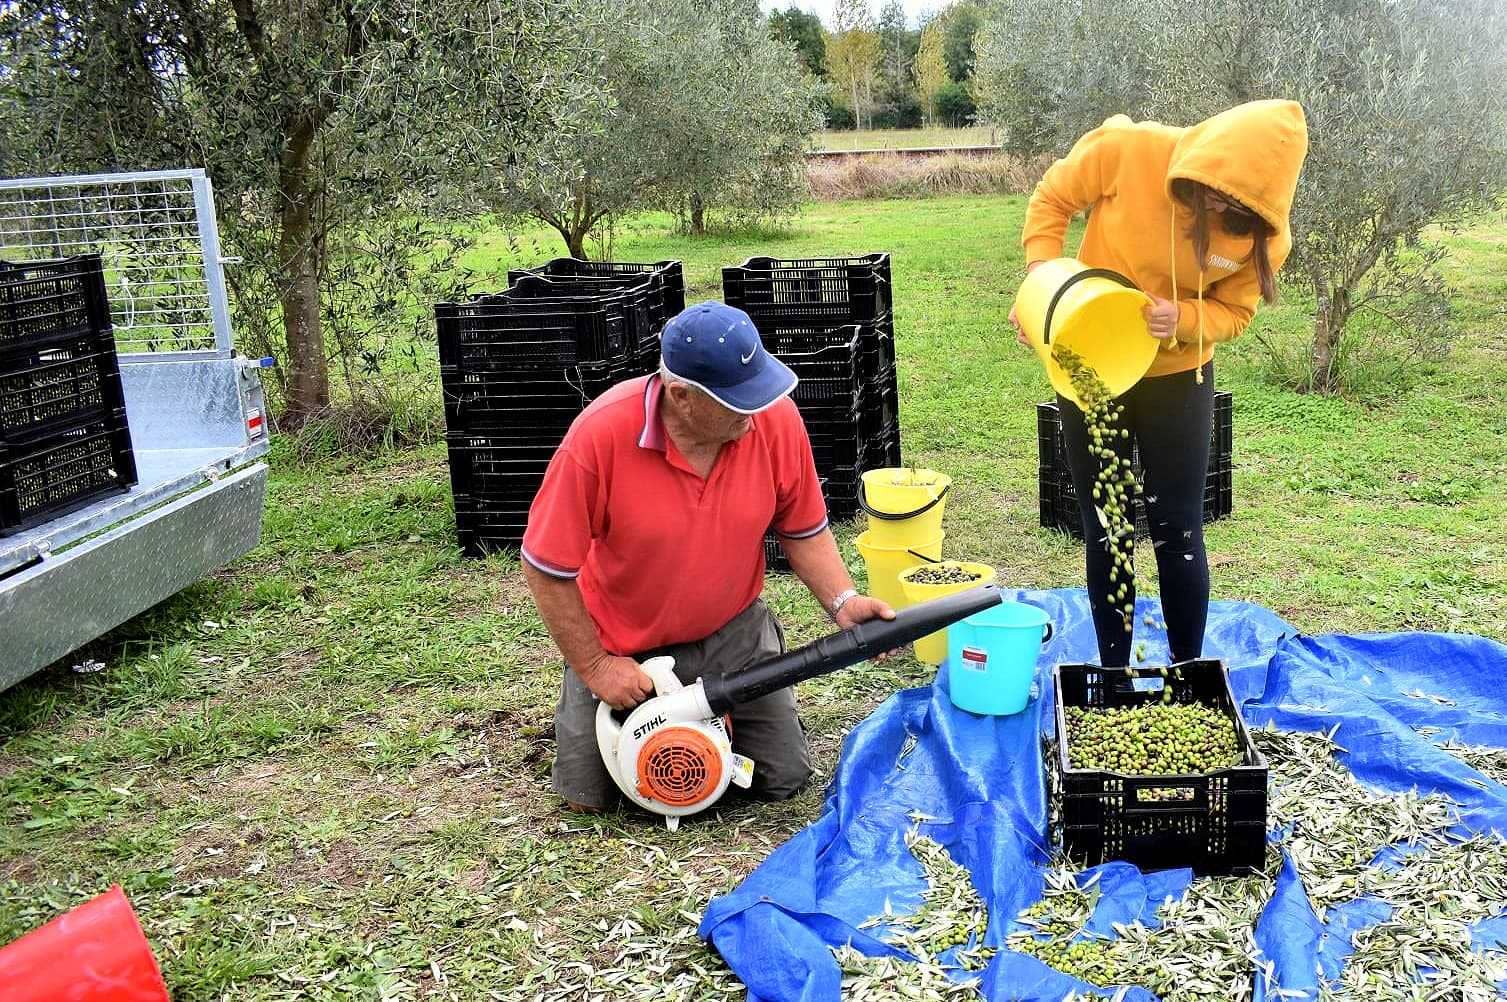 australia-and-new-zealand-competitions-the-best-olive-oils-despite-covid-and-drought-australian-and-new-zealand-producers-shine-at-nyiooc-olive-oil-times